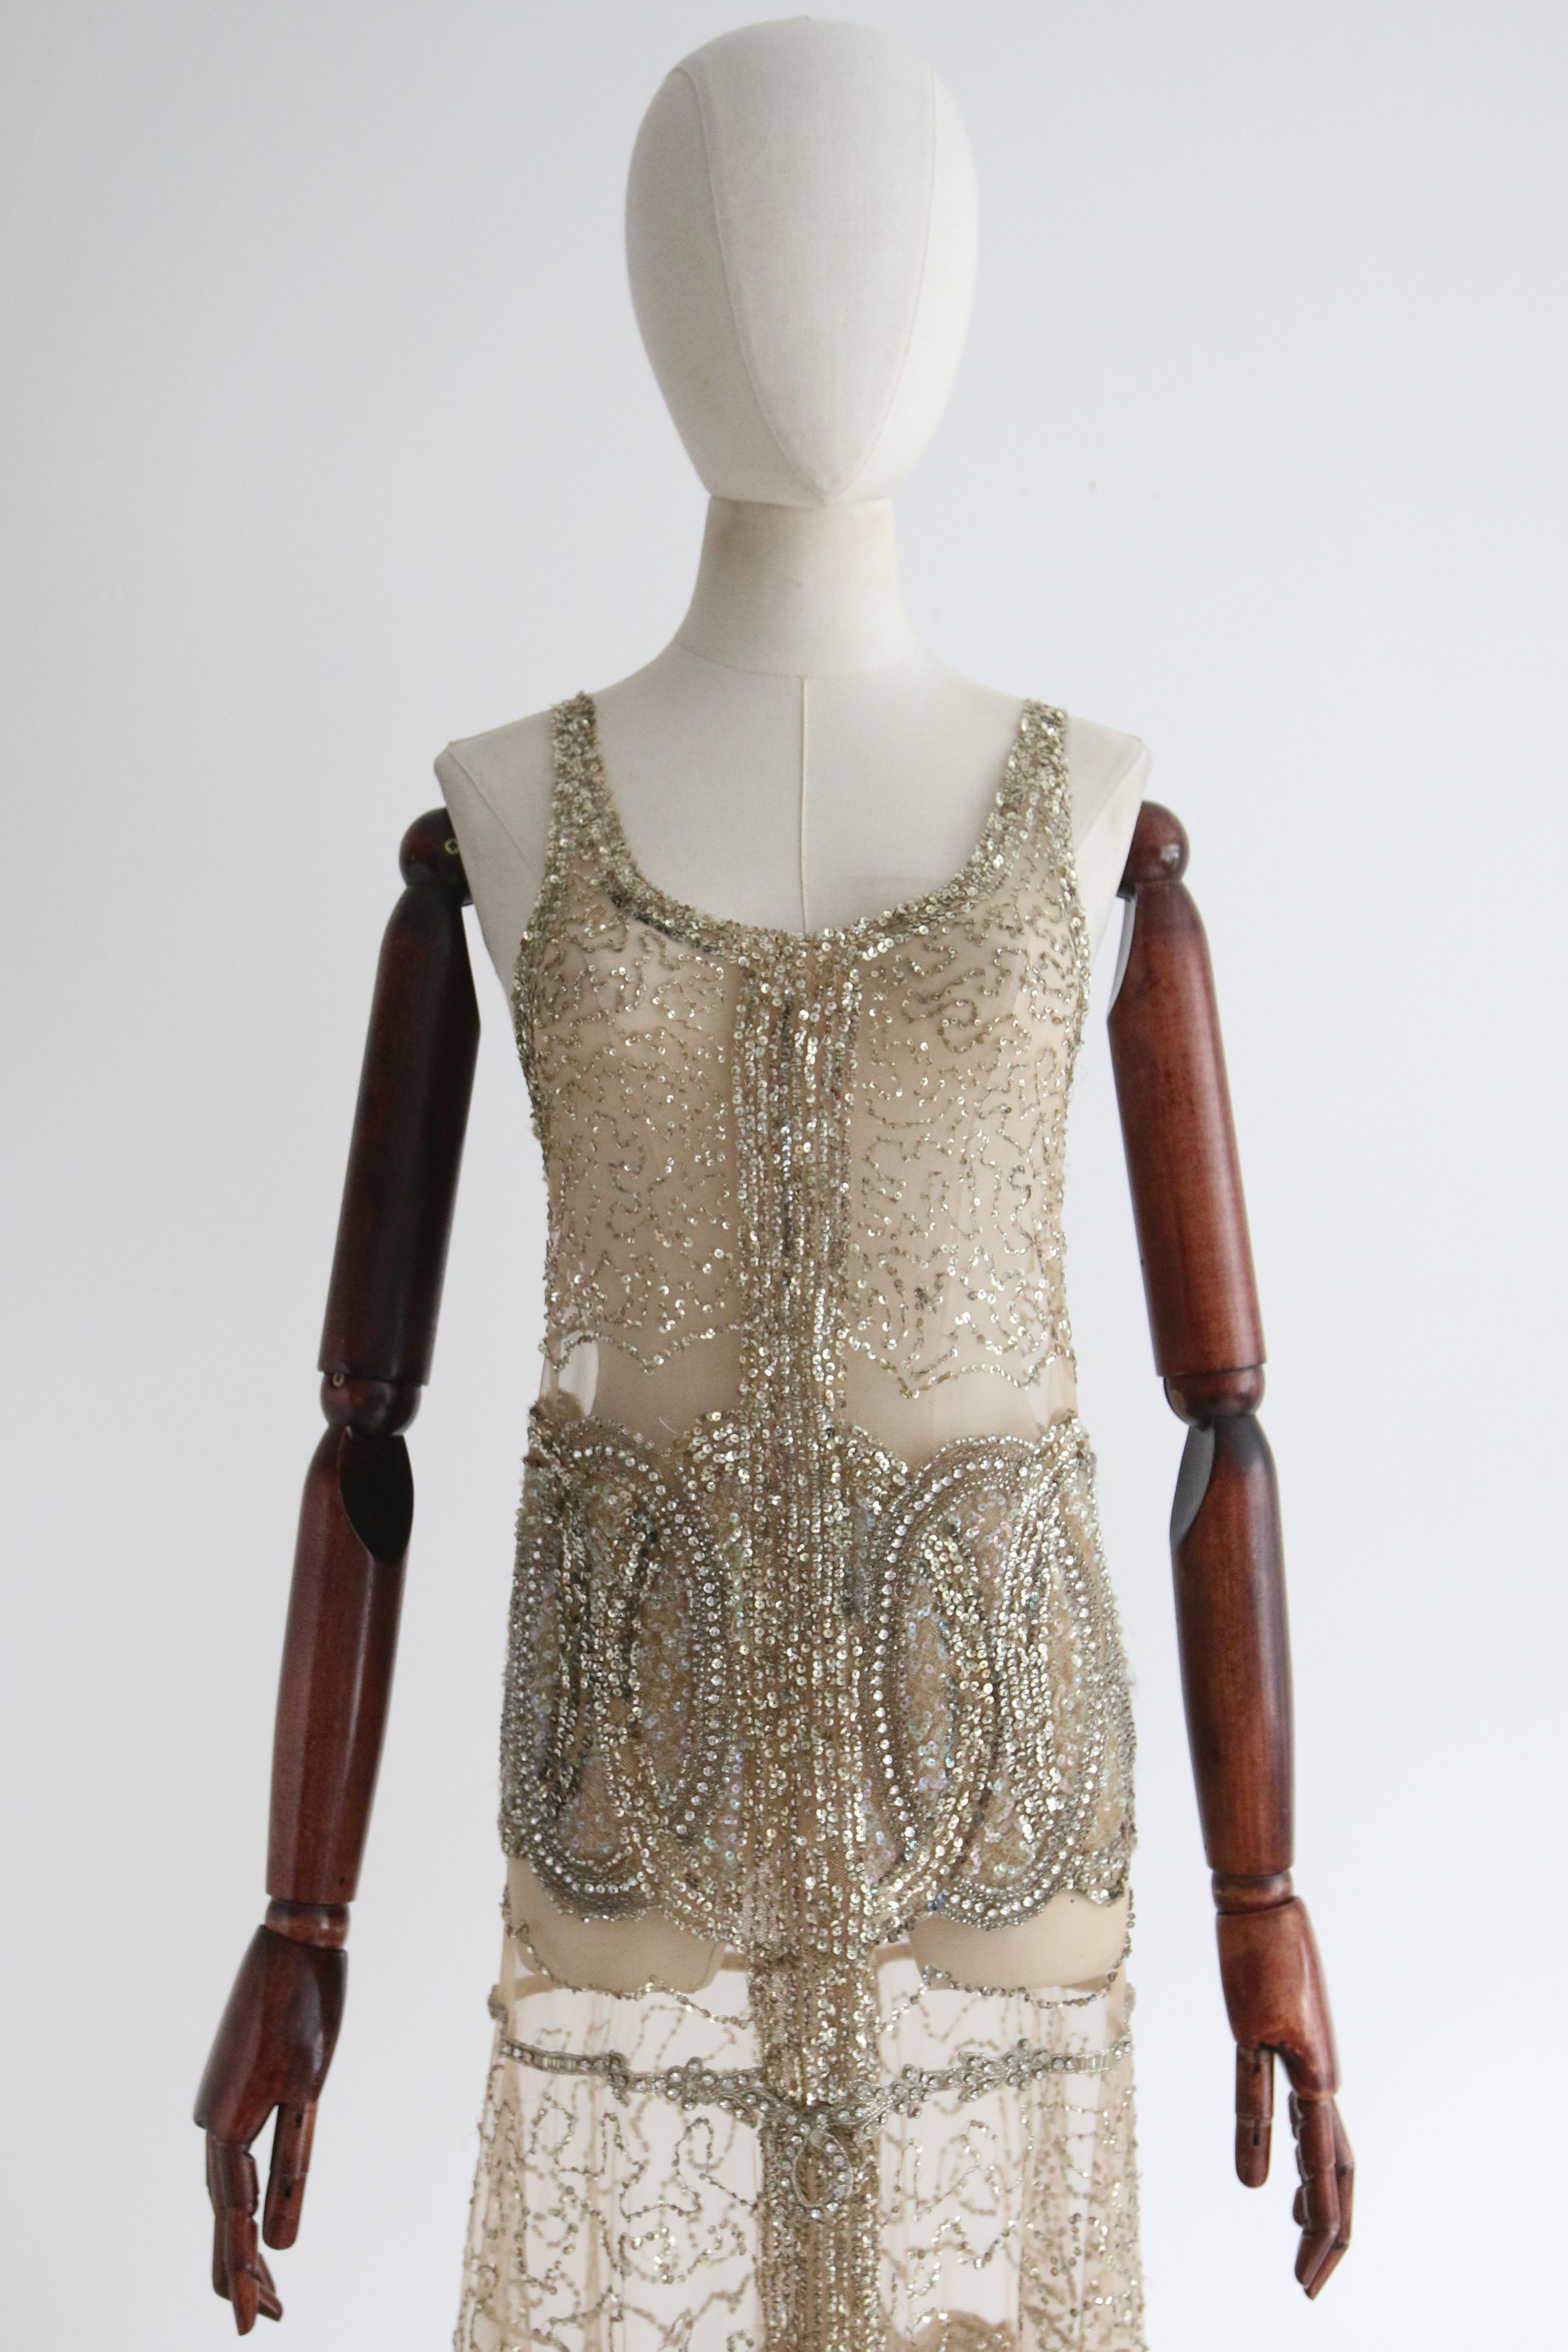 Vintage 1920's Gold Beaded Sequin Dress Flapper Dress UK 6-8 US 2-4 In Good Condition For Sale In Cheltenham, GB